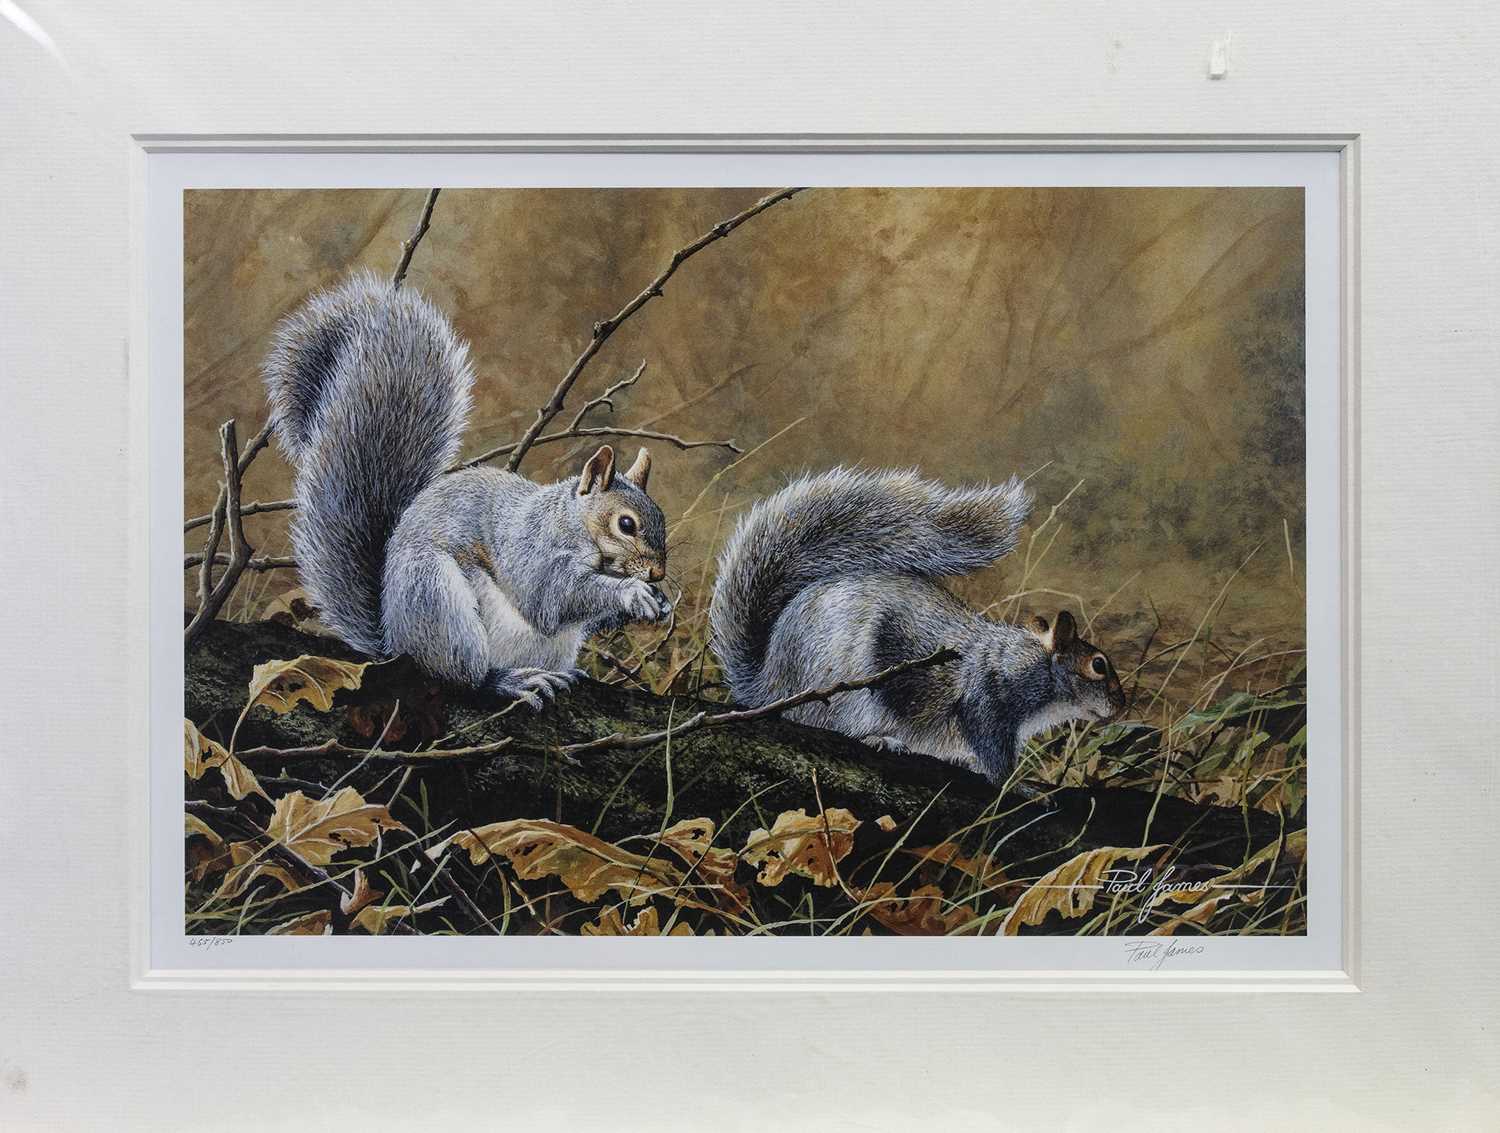 Lot 485 - ANIMAL SELECTIONS, A PRINT BY PAUL JAMES